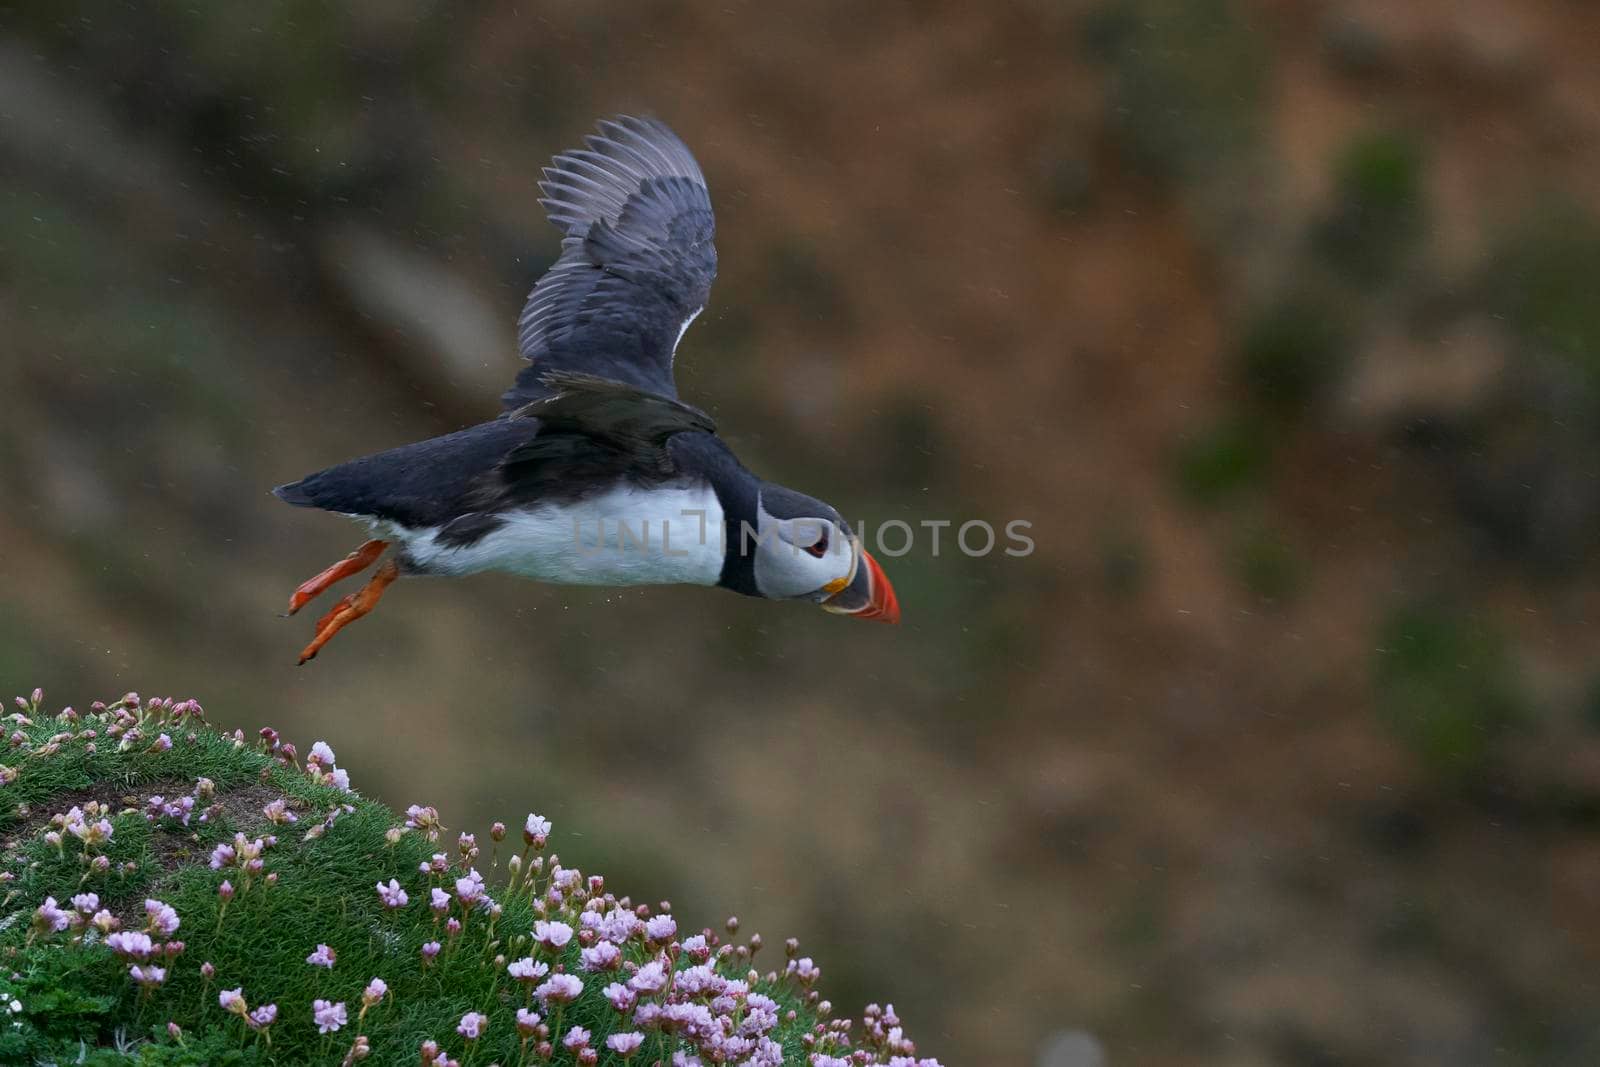 Atlantic puffin (Fratercula arctica) taking off from a cliff on Great Saltee Island off the coast of Ireland.